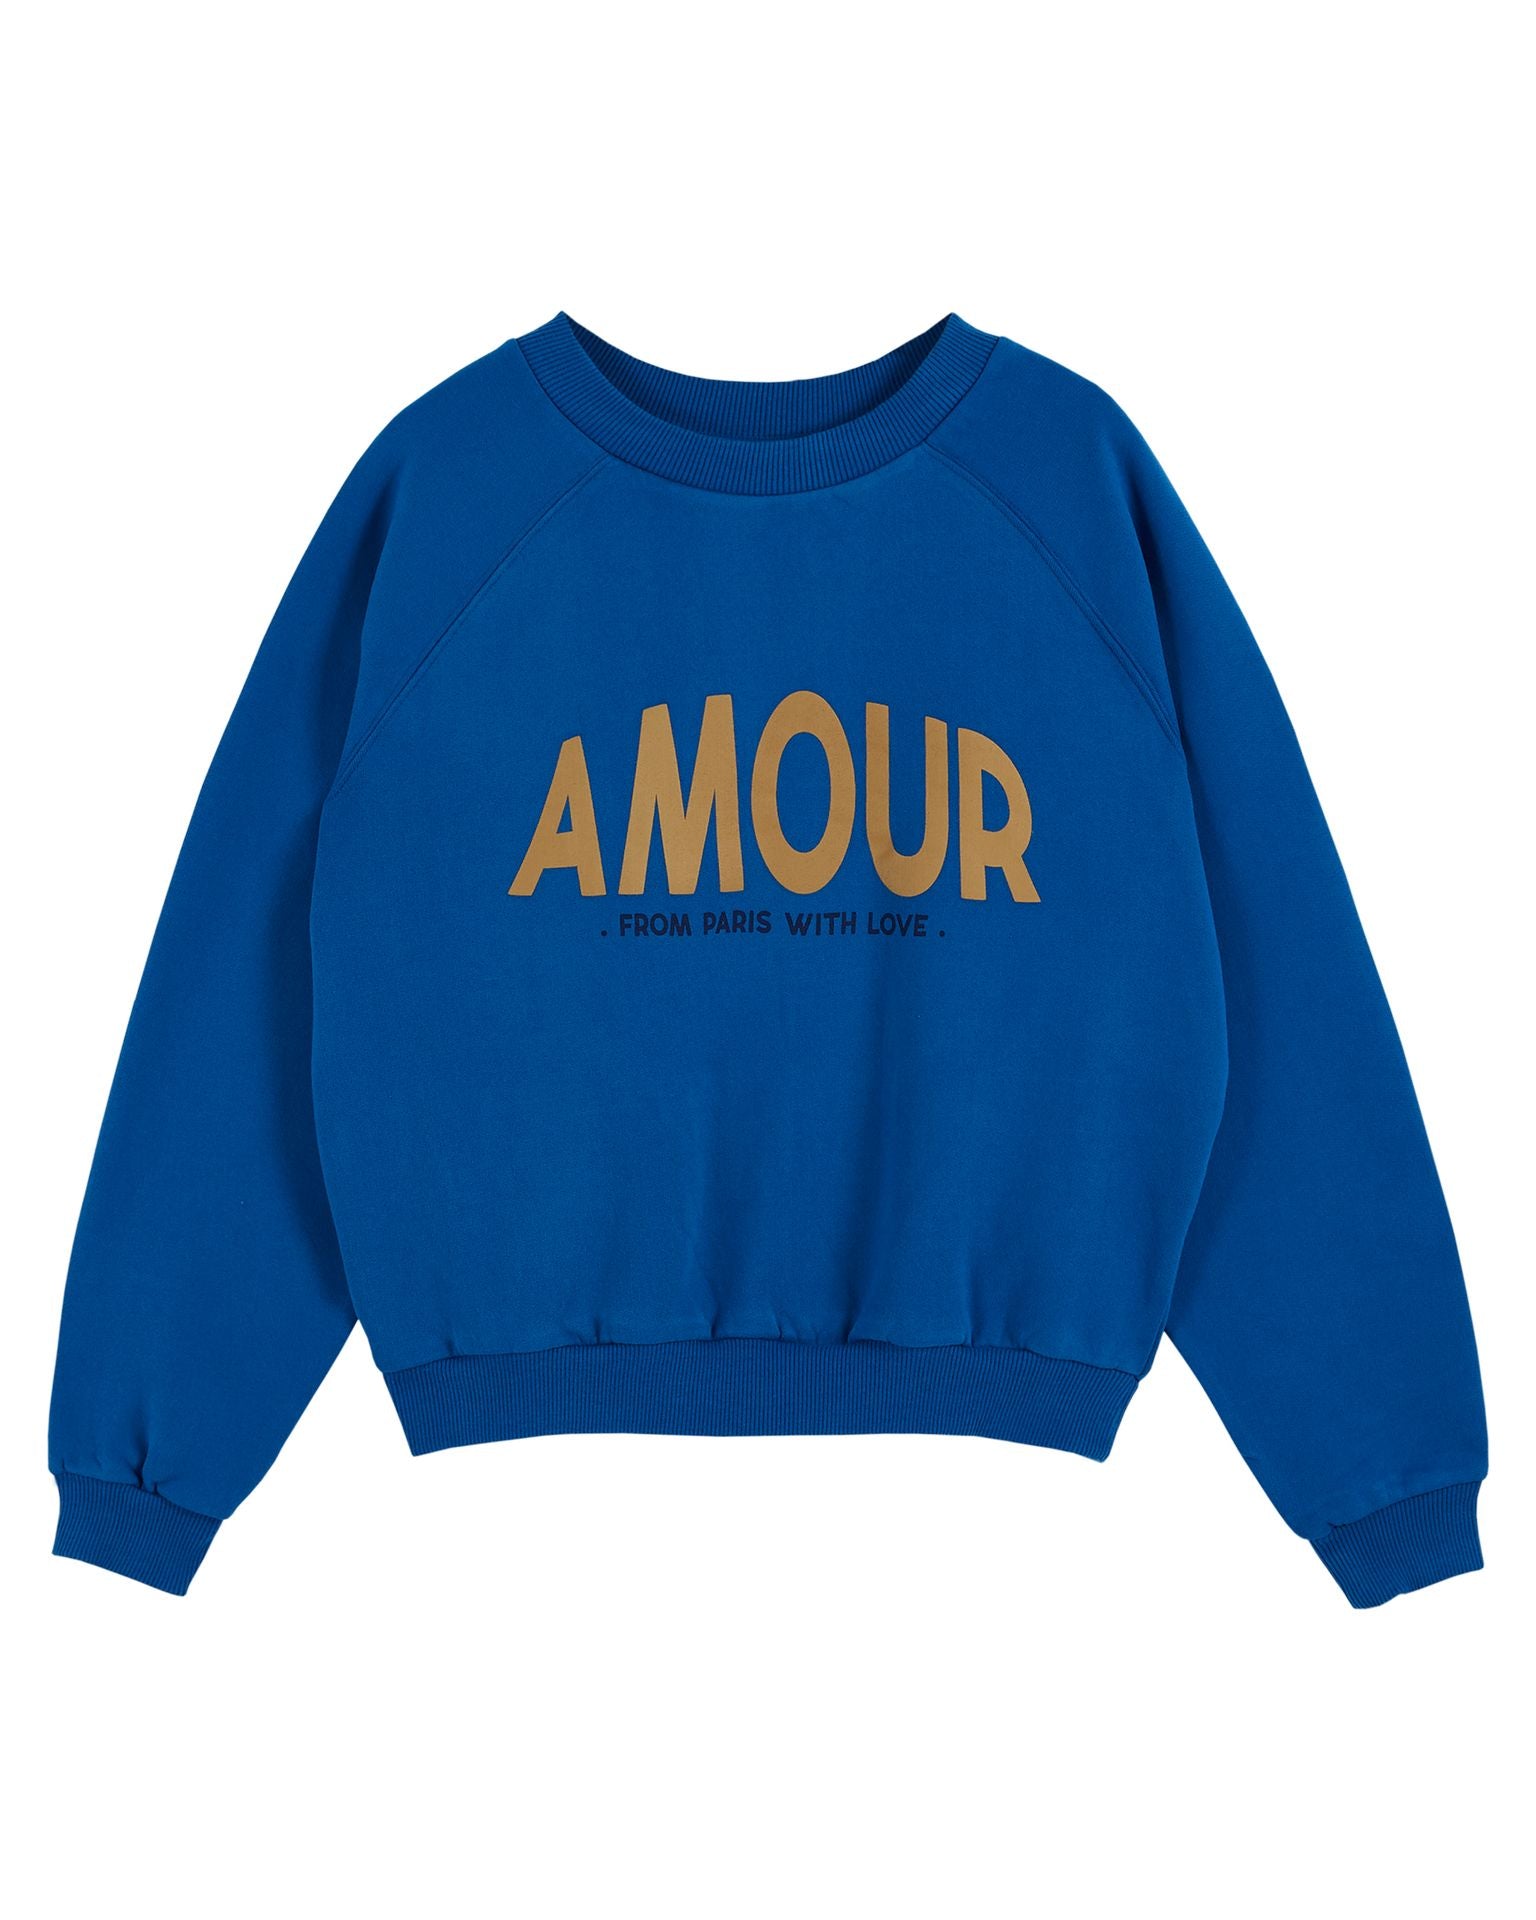 Blue coloured scoop neck sweatshirt with raglan sleeves and "amour" logo on the centre front